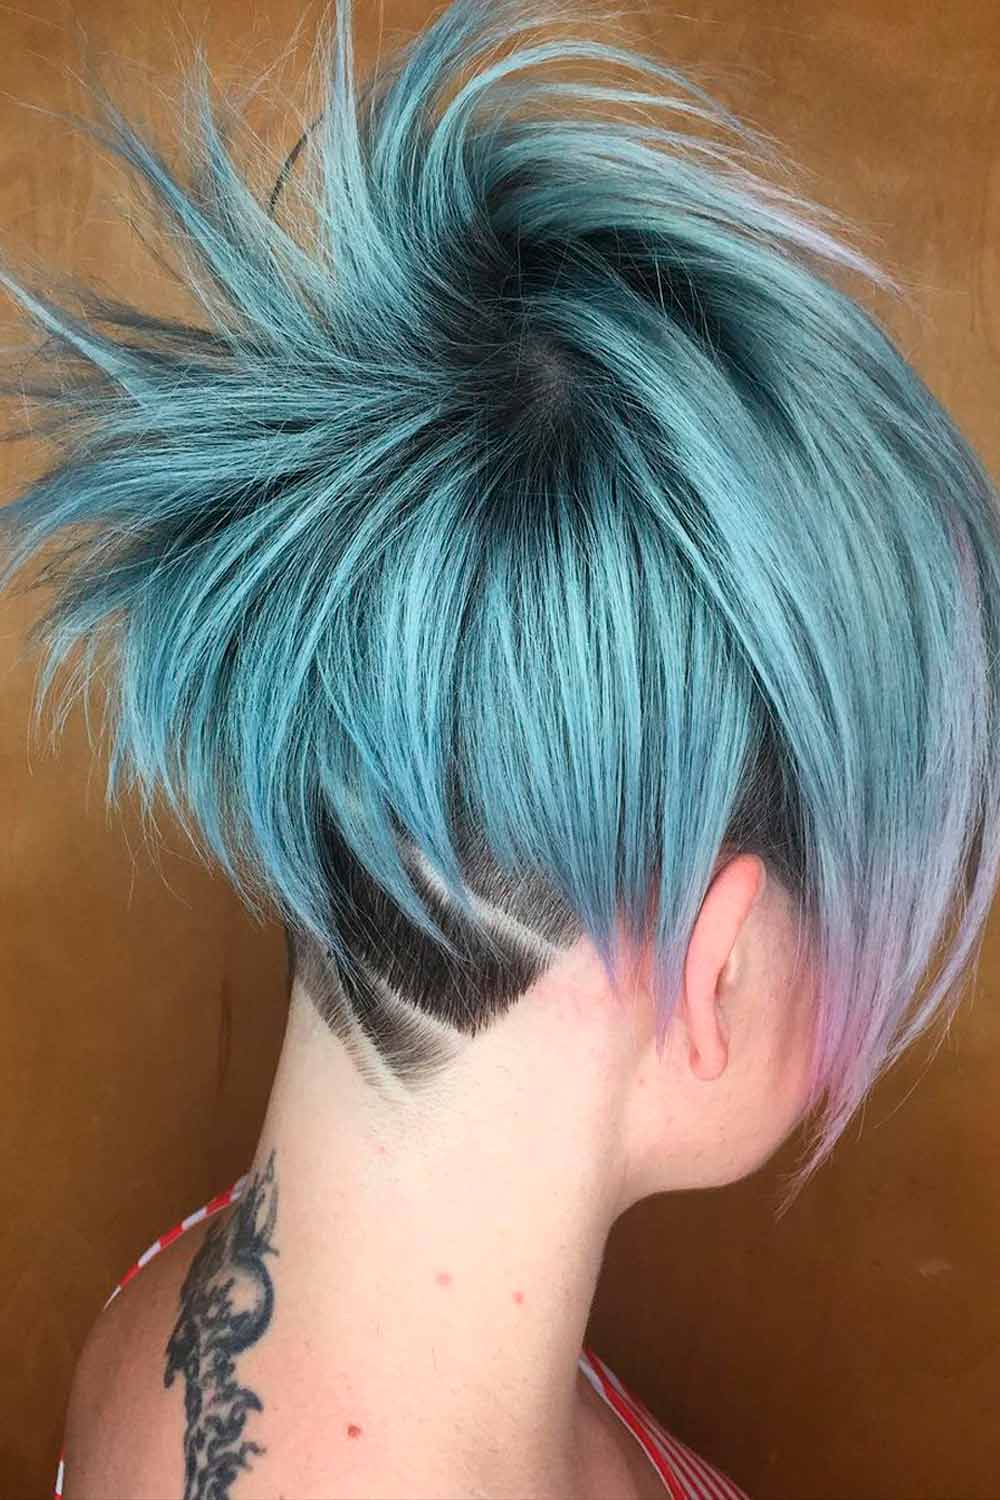 Peacock-green Spiky Hair with a Striped Undercut